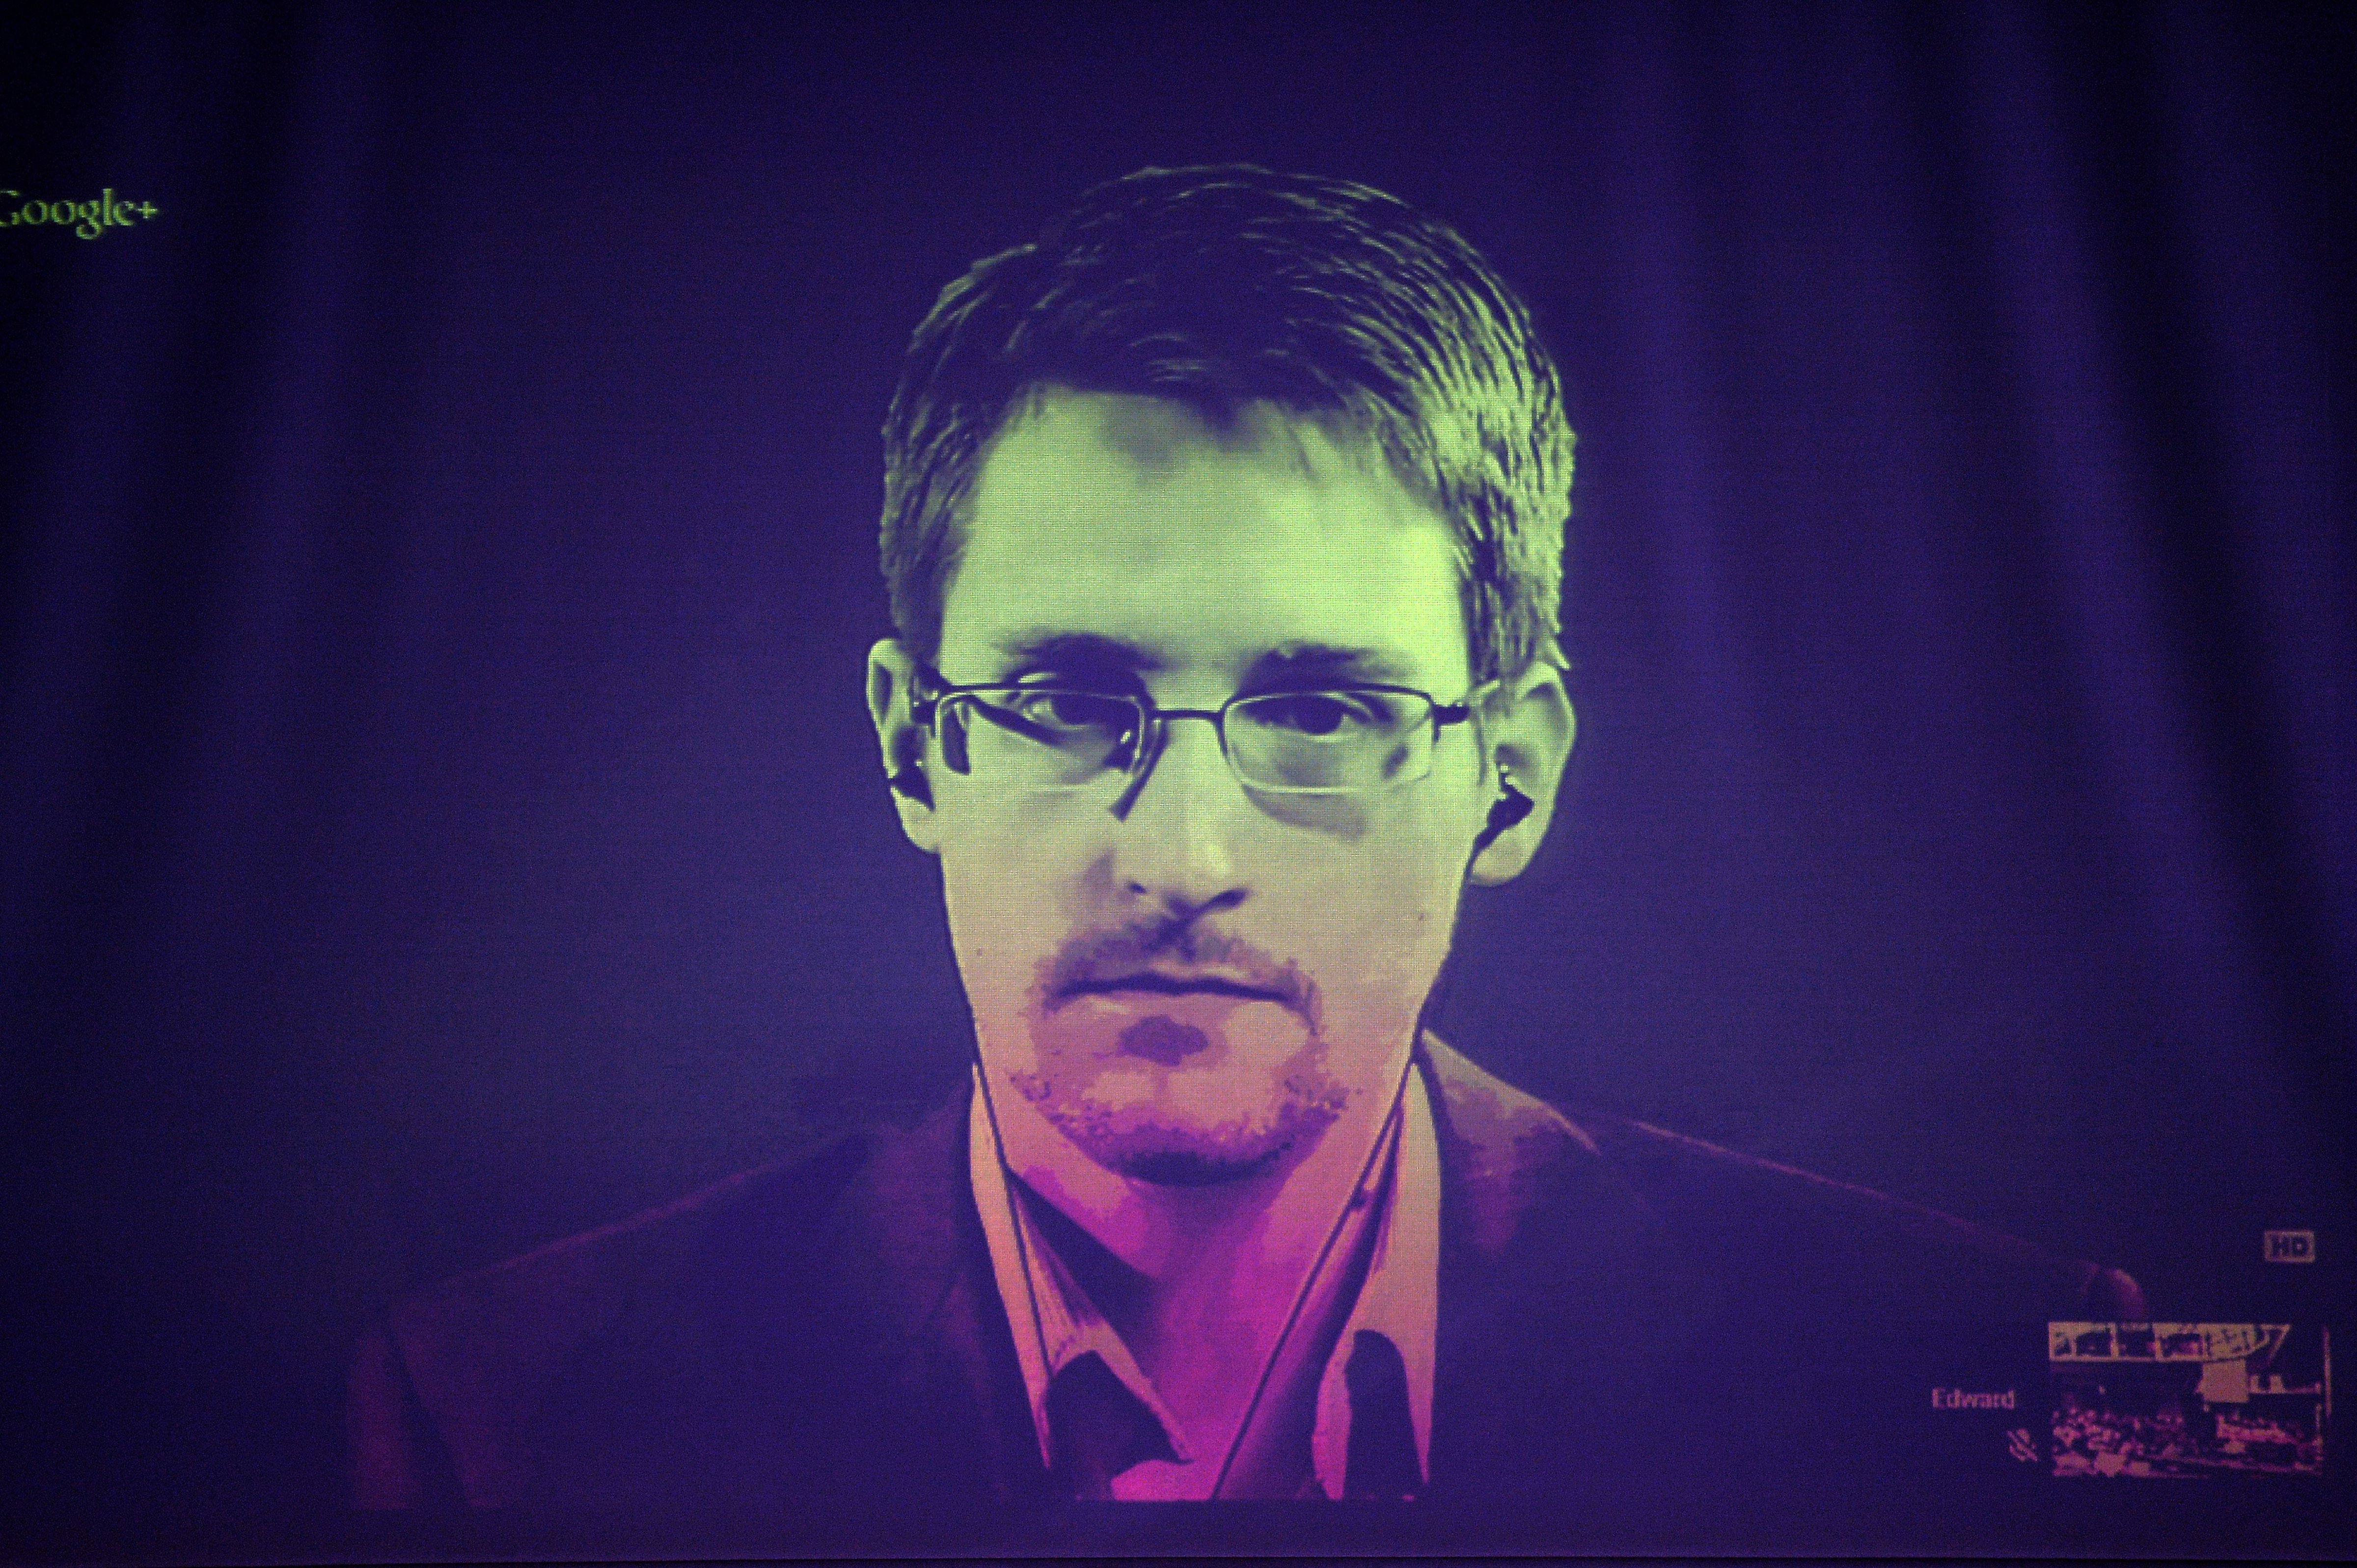 U.S. National Security Agency (NSA) whistleblower Edward Snowden speaks to European officials via videoconference during a parliamentary hearing on improving the protection of whistleblowers, at the Council of Europe in Strasbourg, eastern France, on June 24, 2014. (Frederick Florin&mdash;AFP/Getty Images)